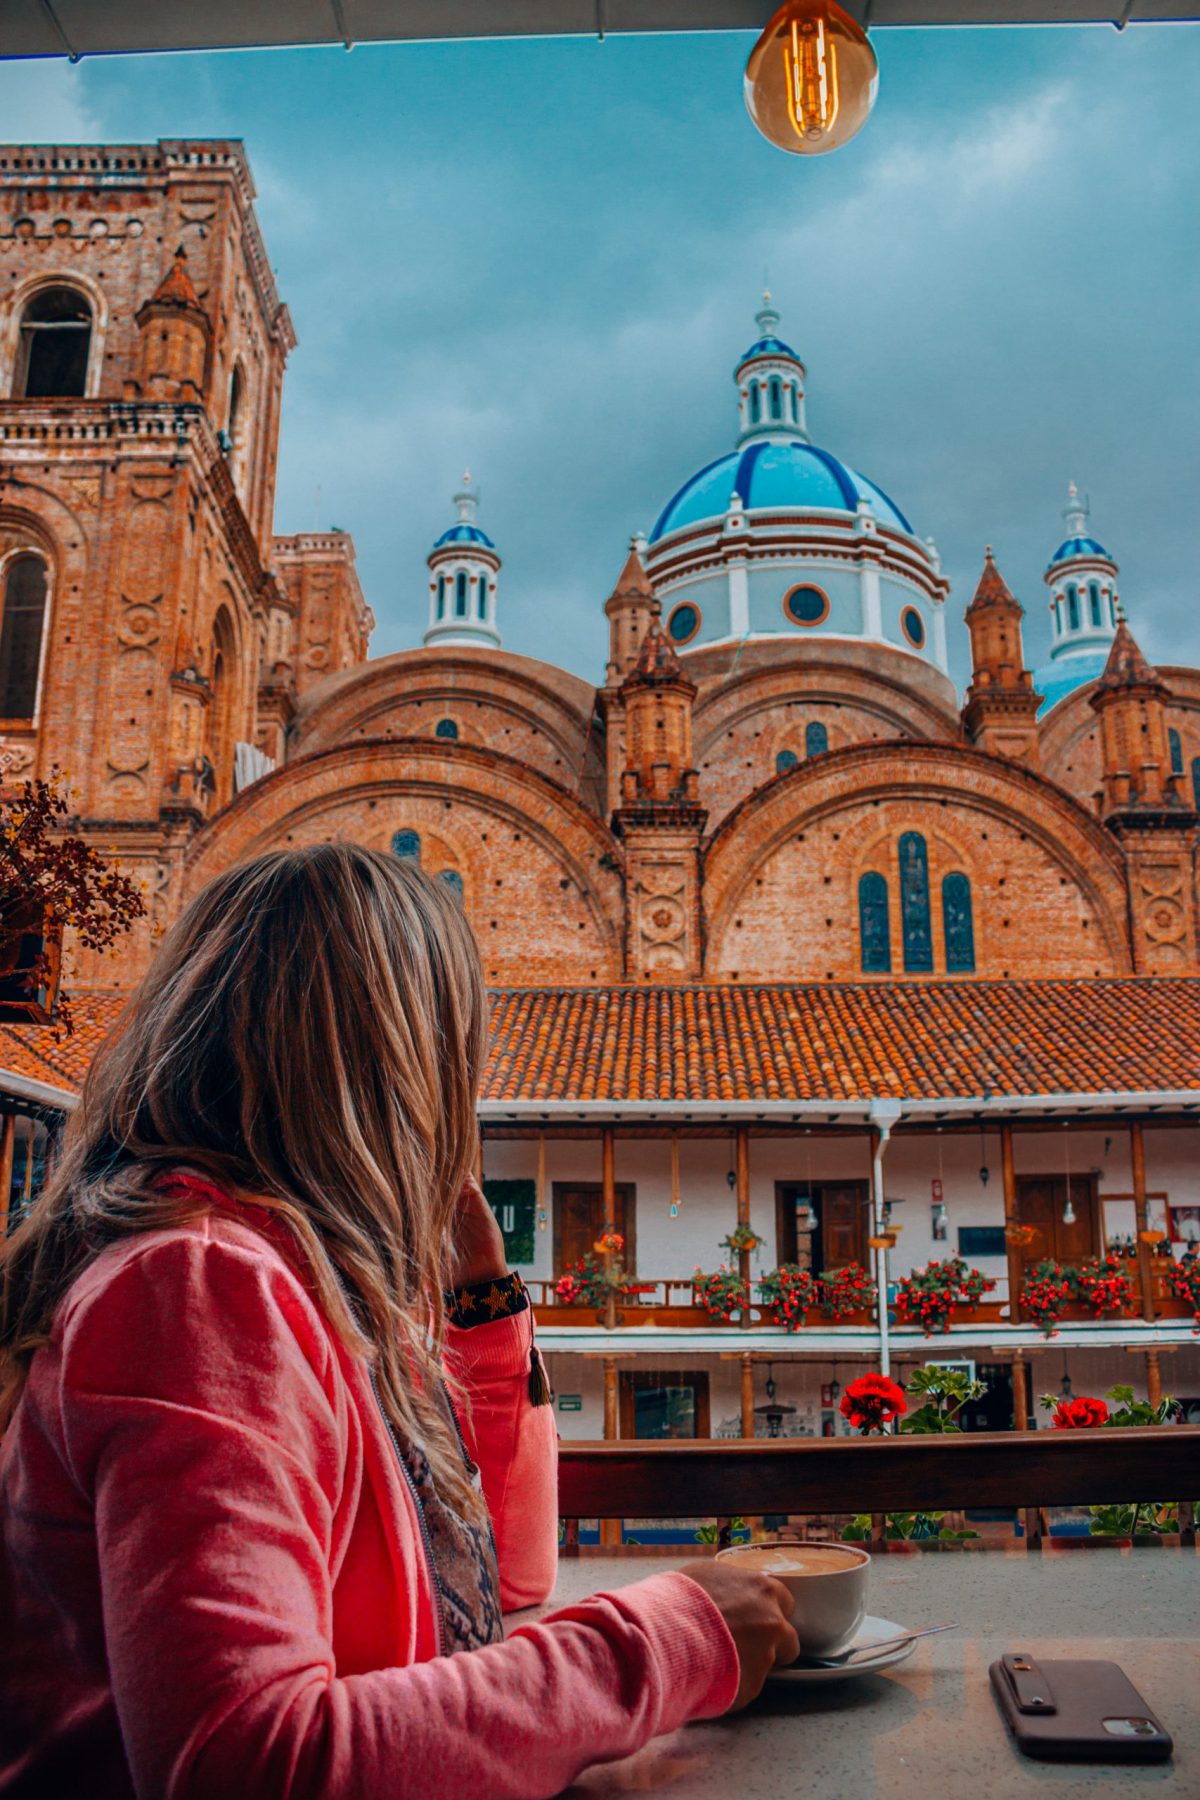 City of Cuenca, main cathedral